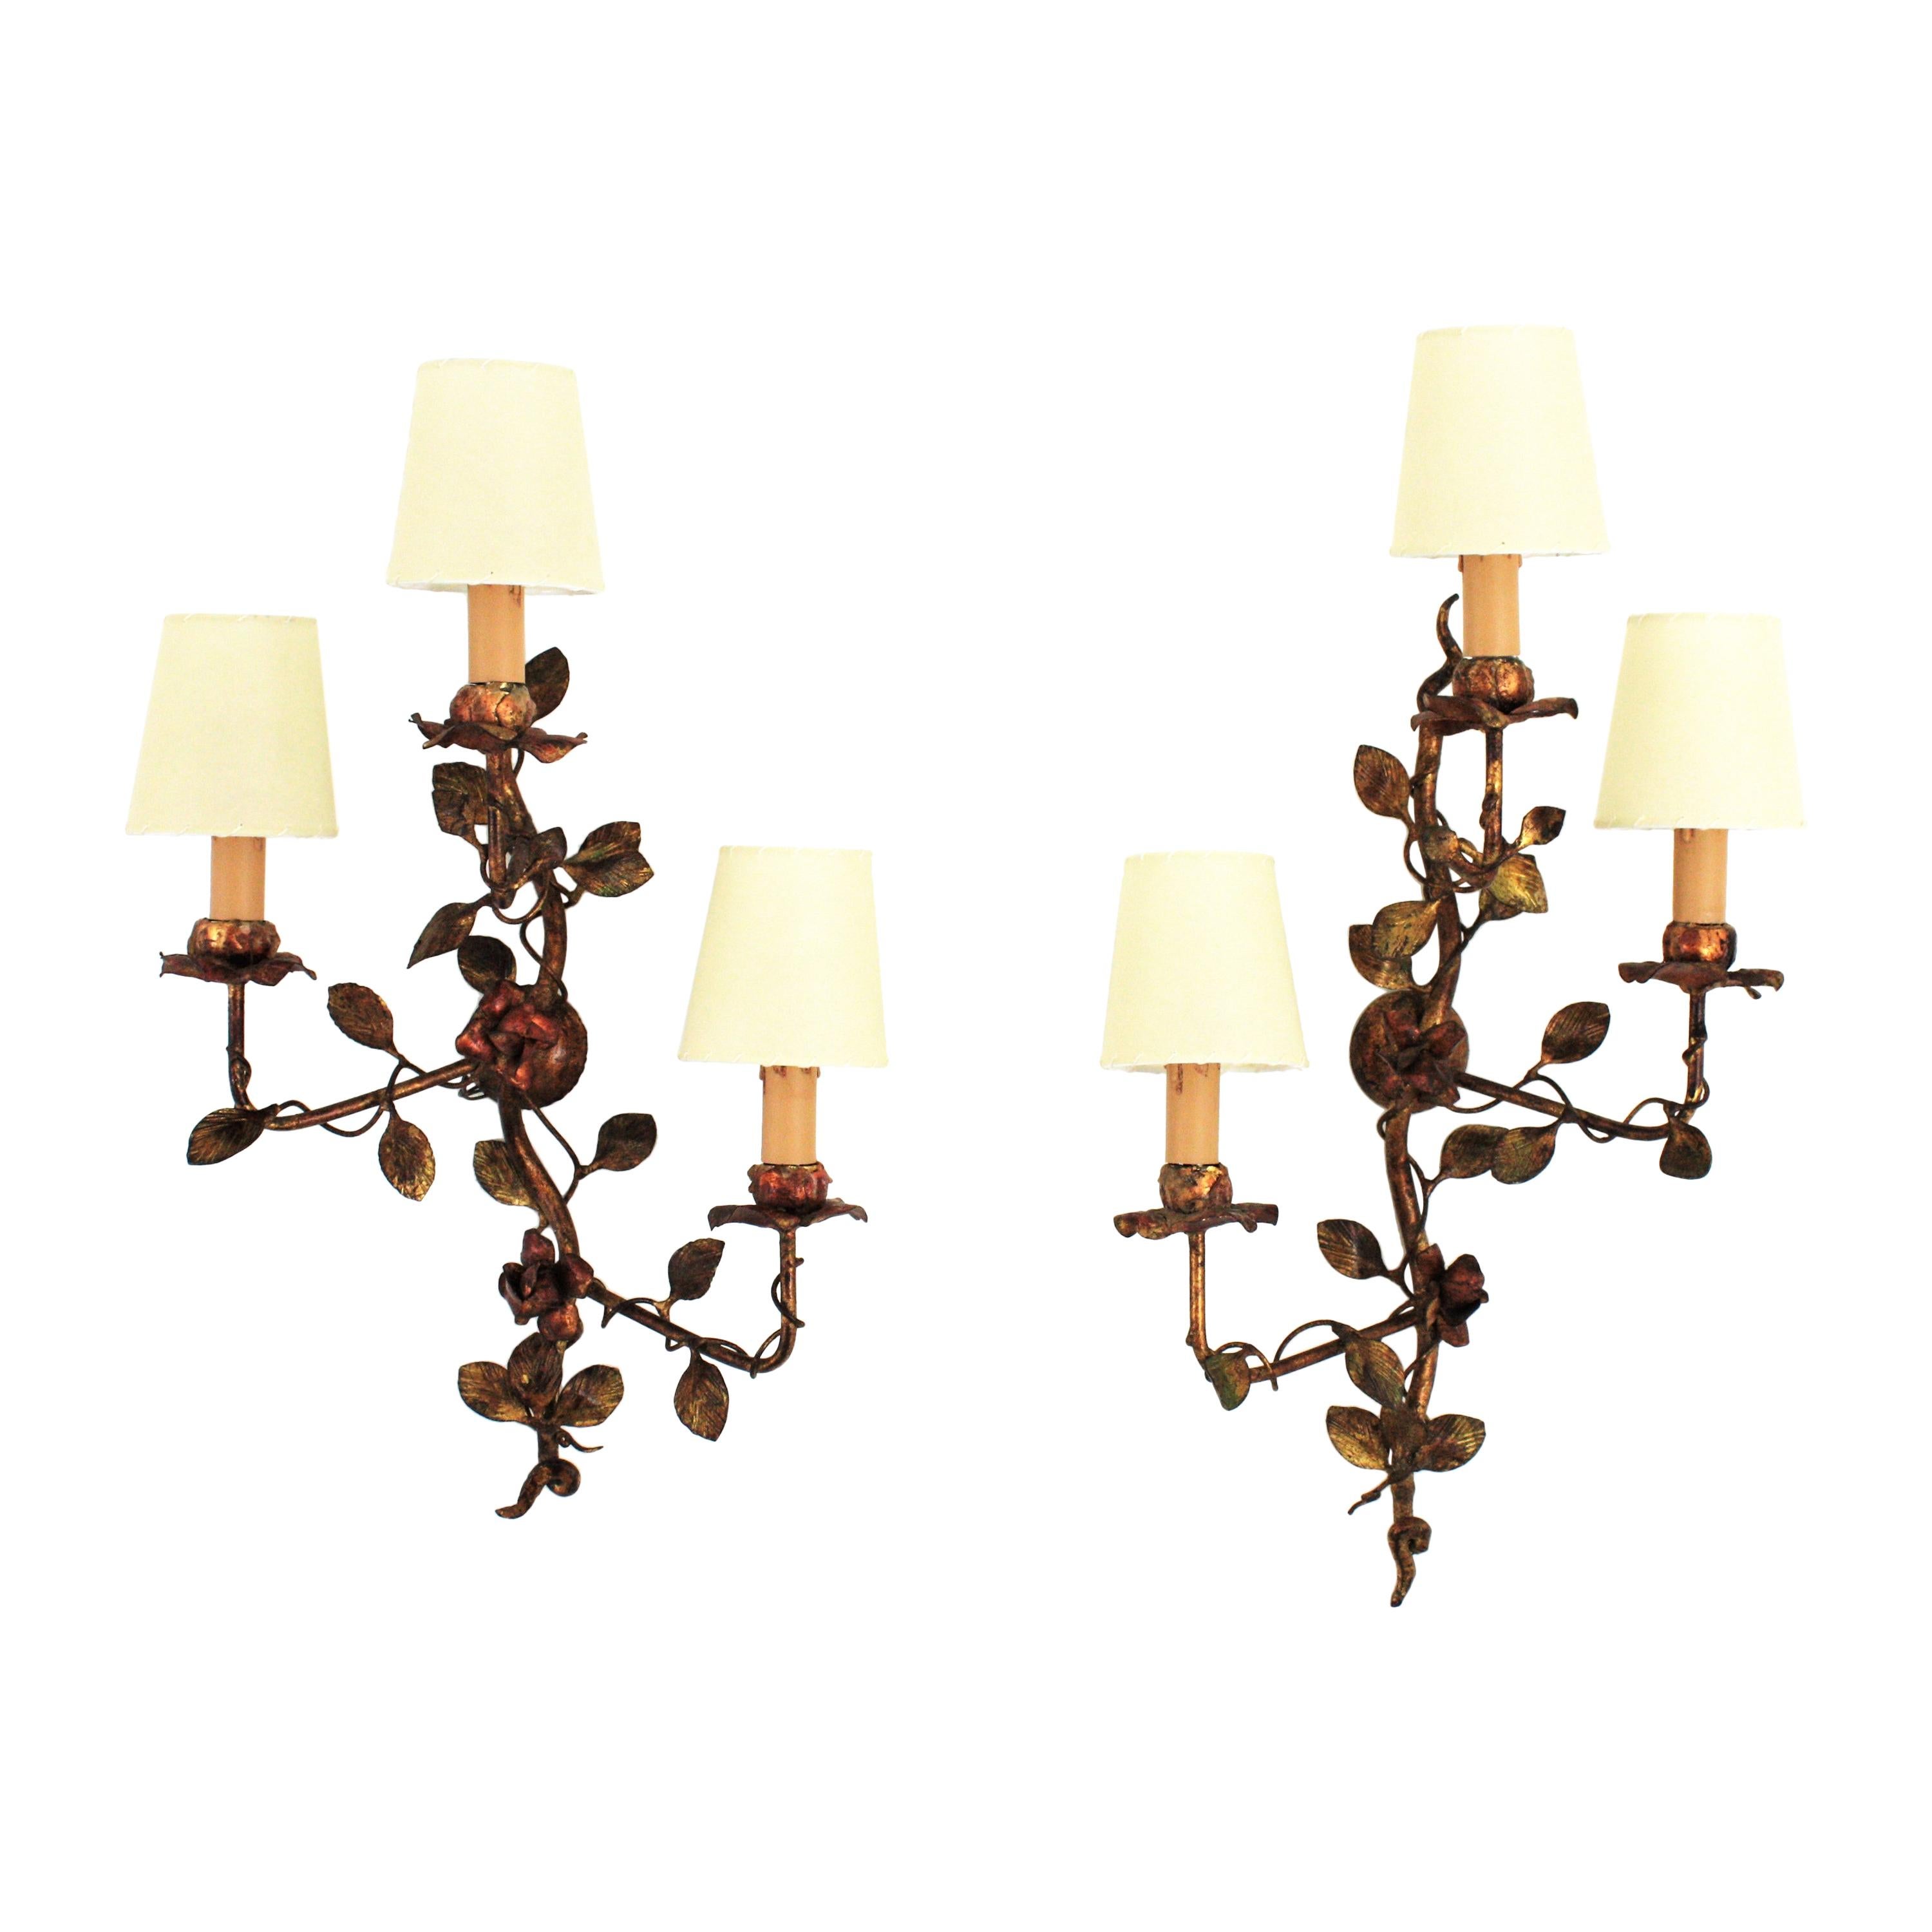 Pair of Foliage Floral Tole Wall Sconces in Polychromed Gilt Iron